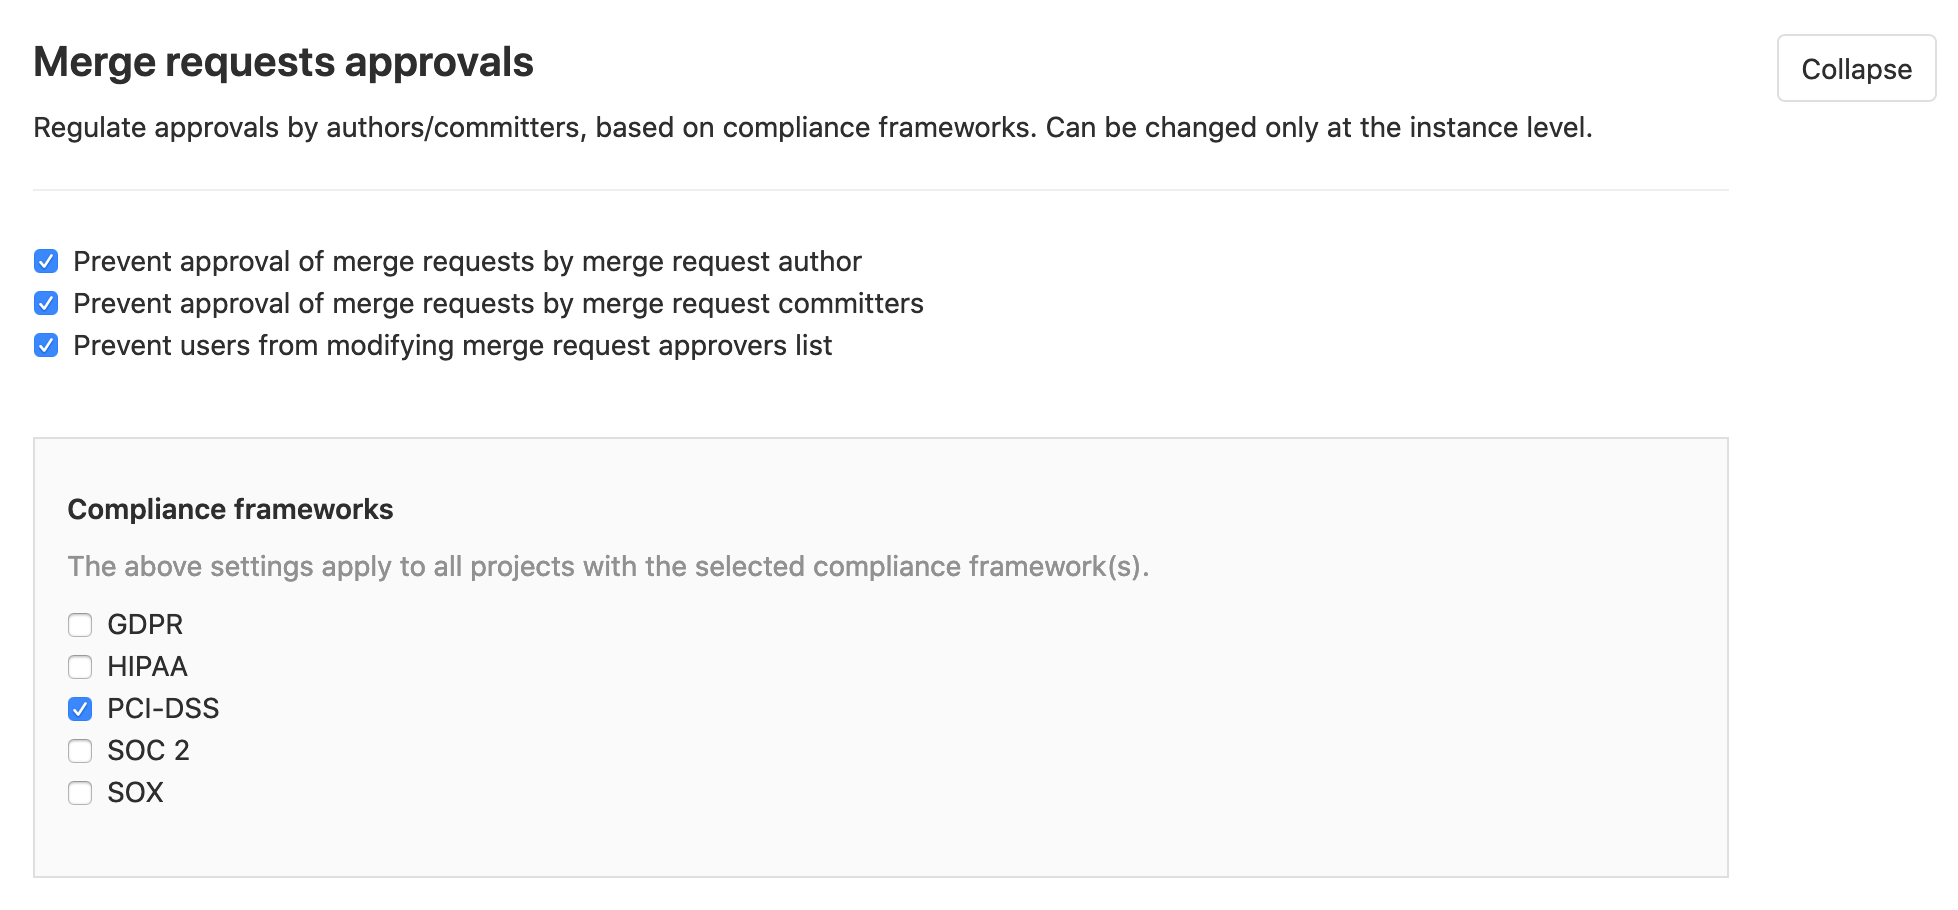 Scope MR approval settings to compliance frameworks